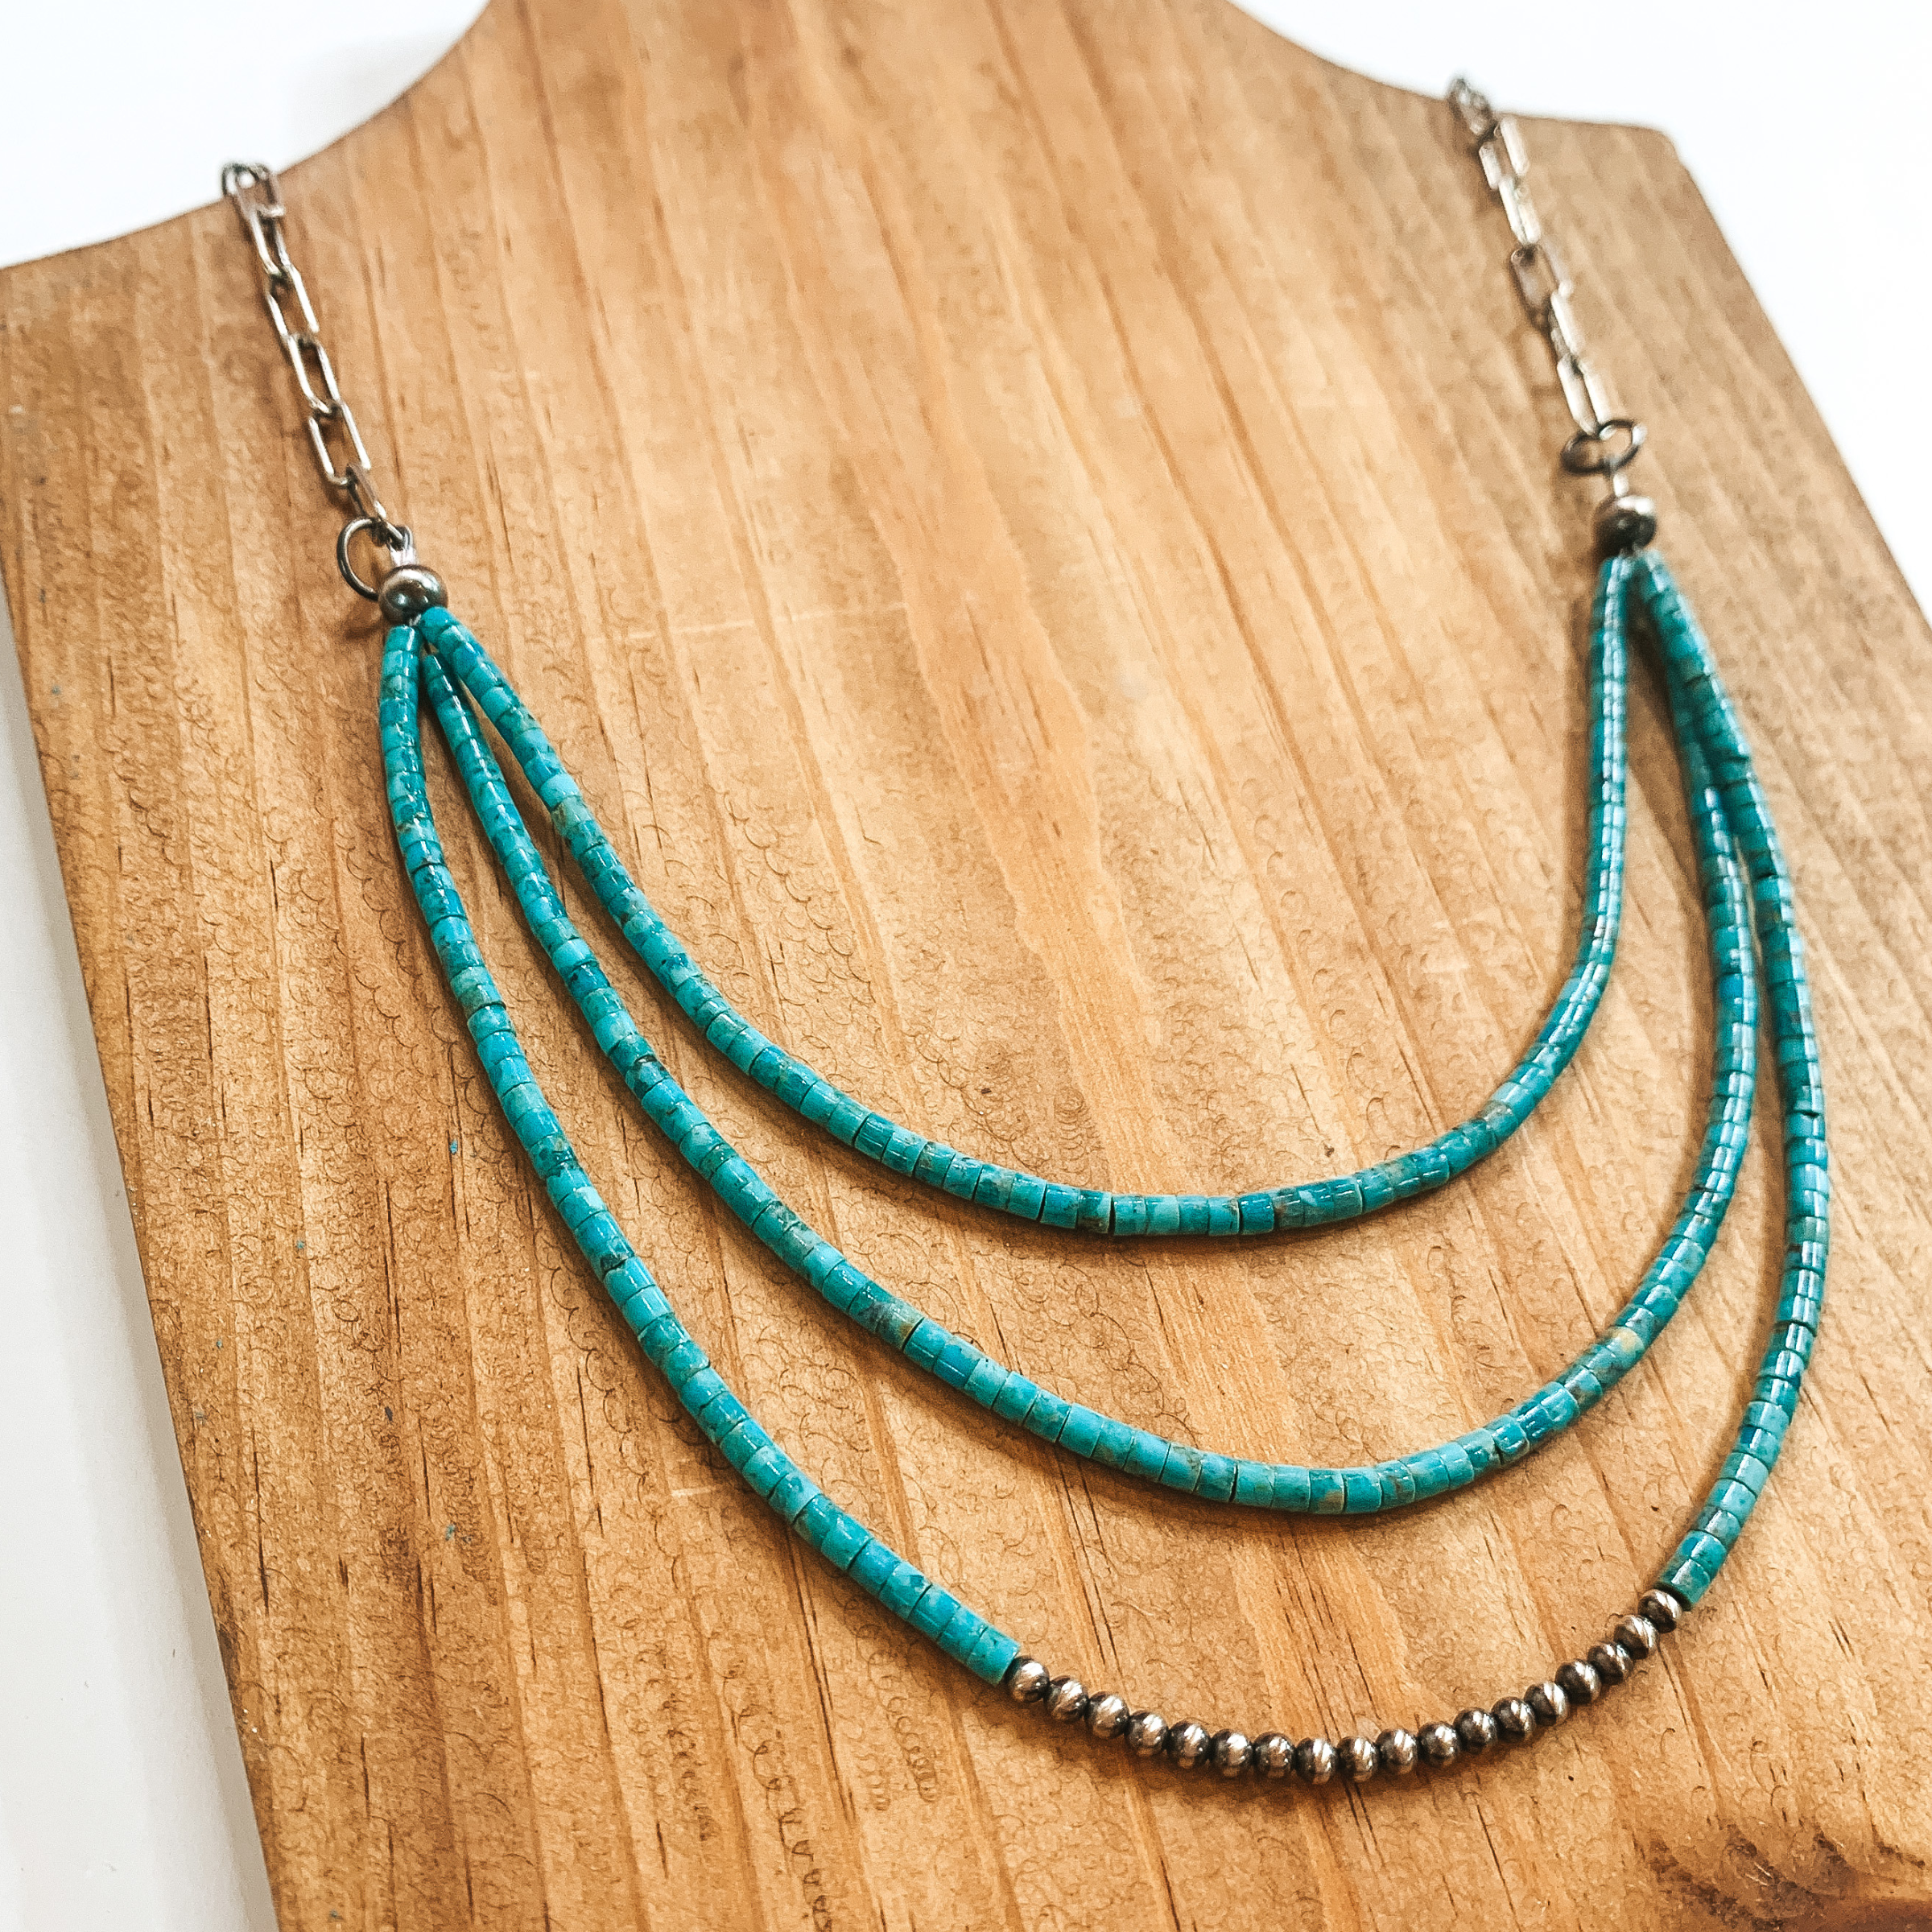 Navajo | Navajo Handmade Sterling Silver Paperclip Chain Necklace with Three Strands of Turquoise Chip Beads and Navajo Pearls - Giddy Up Glamour Boutique